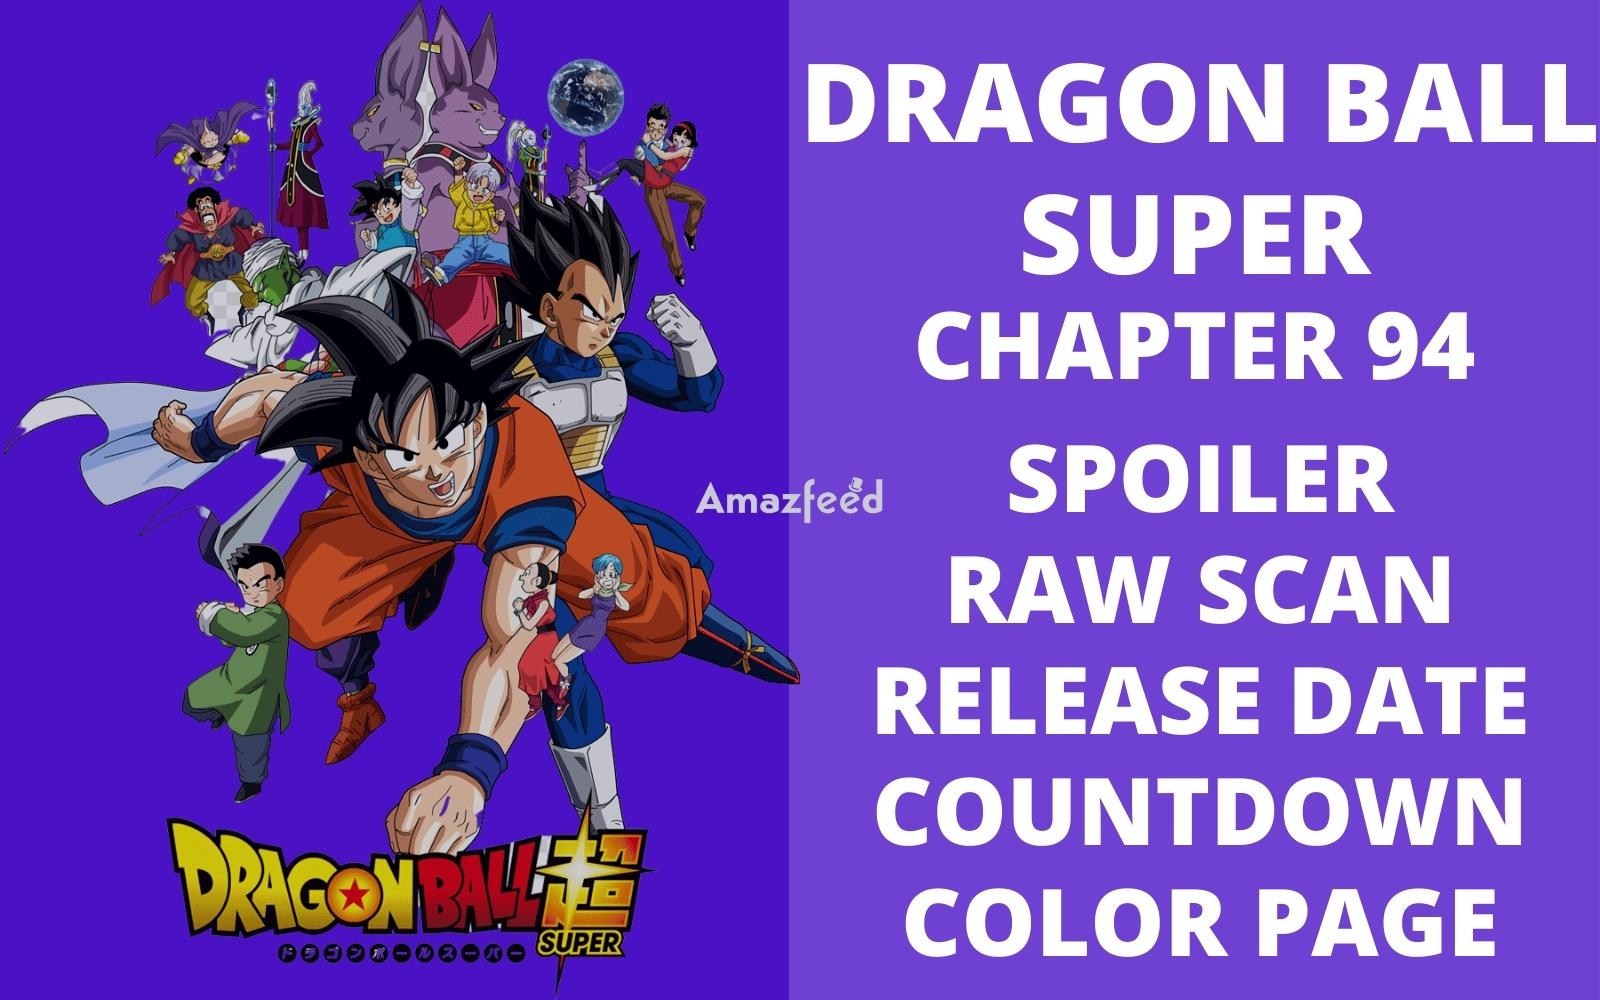 Dragon Ball Super Chapter 94 Spoiler, Raw Scan, Color Page, Release Date